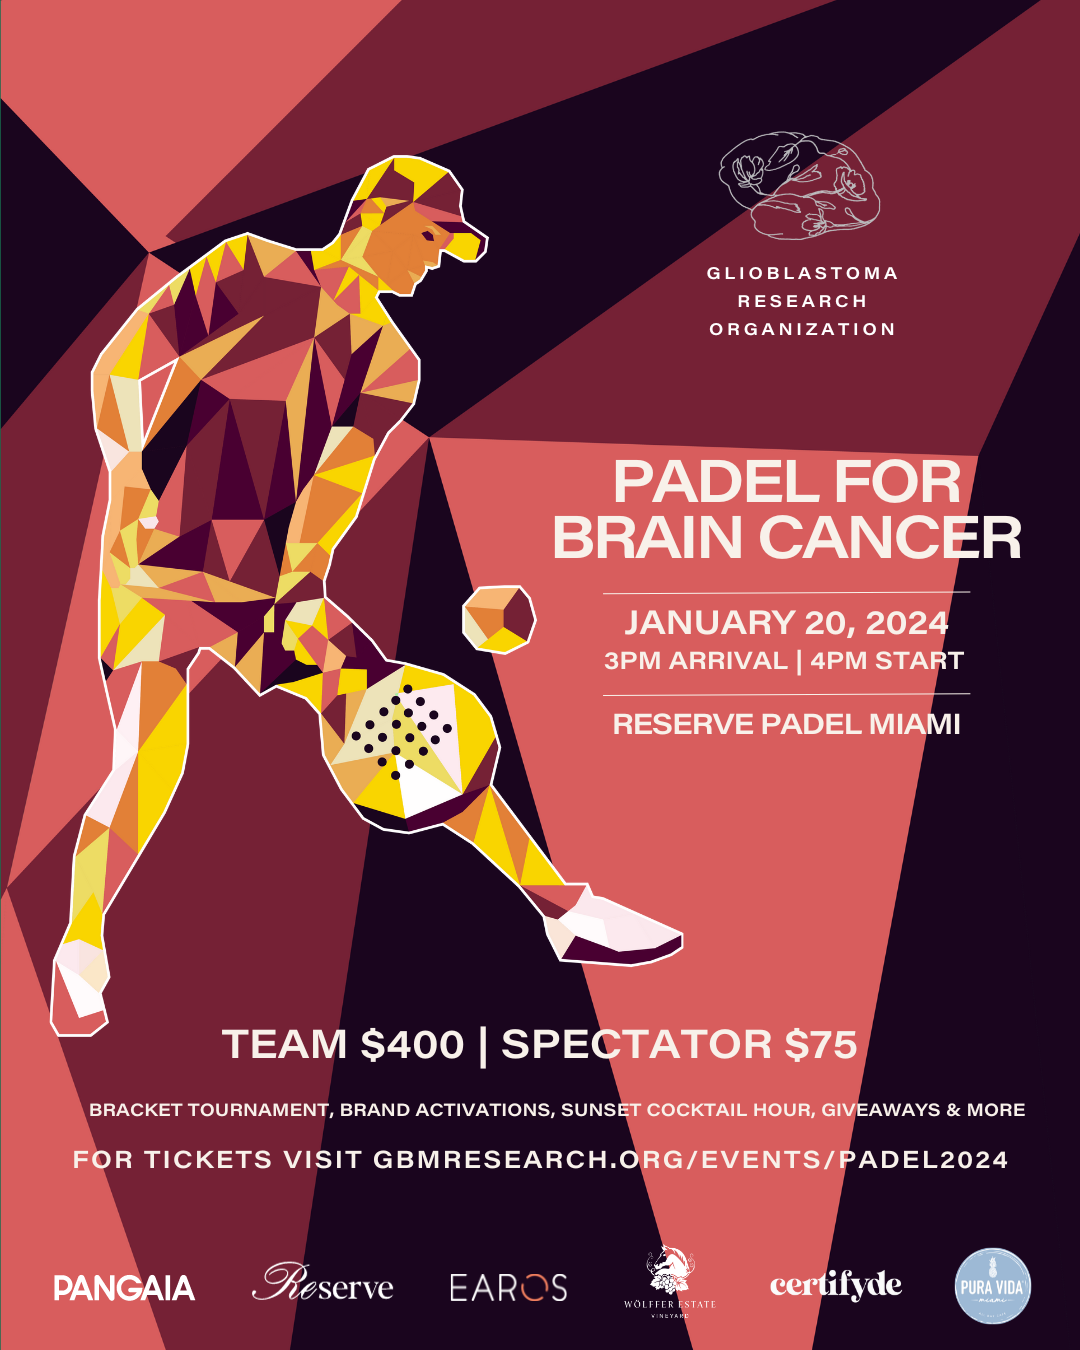 Padel for Brain Cancer